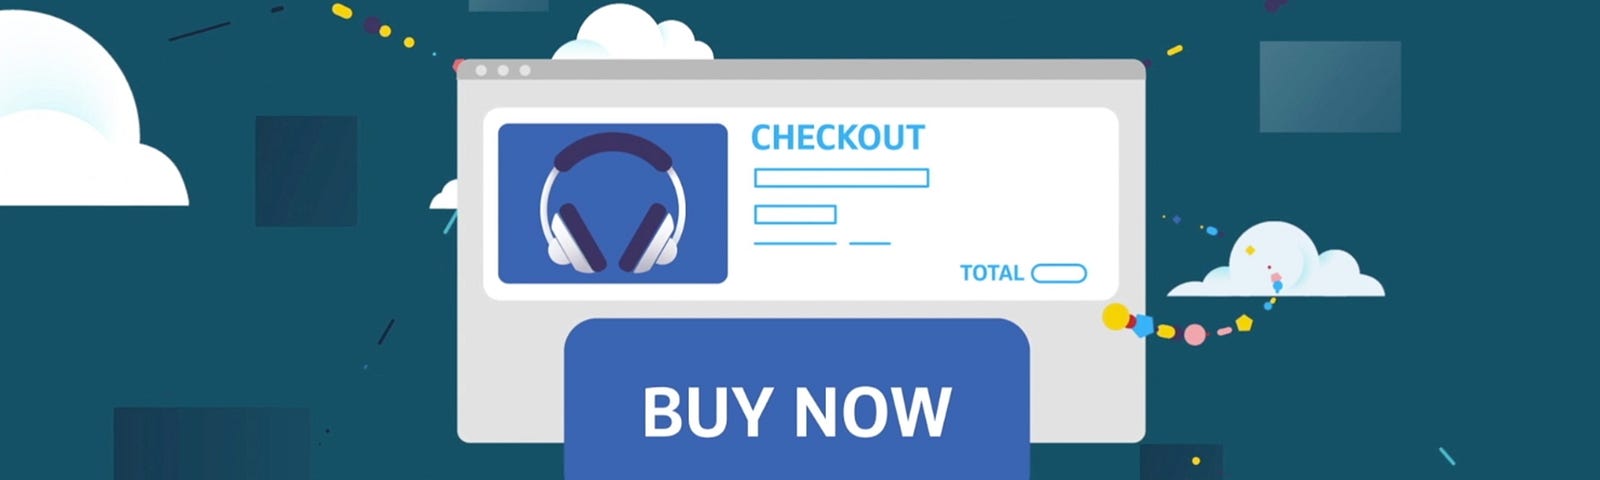 vector drawing of a checkout screen with black headphones and blue squares, with a dark teal background with white clouds scattered